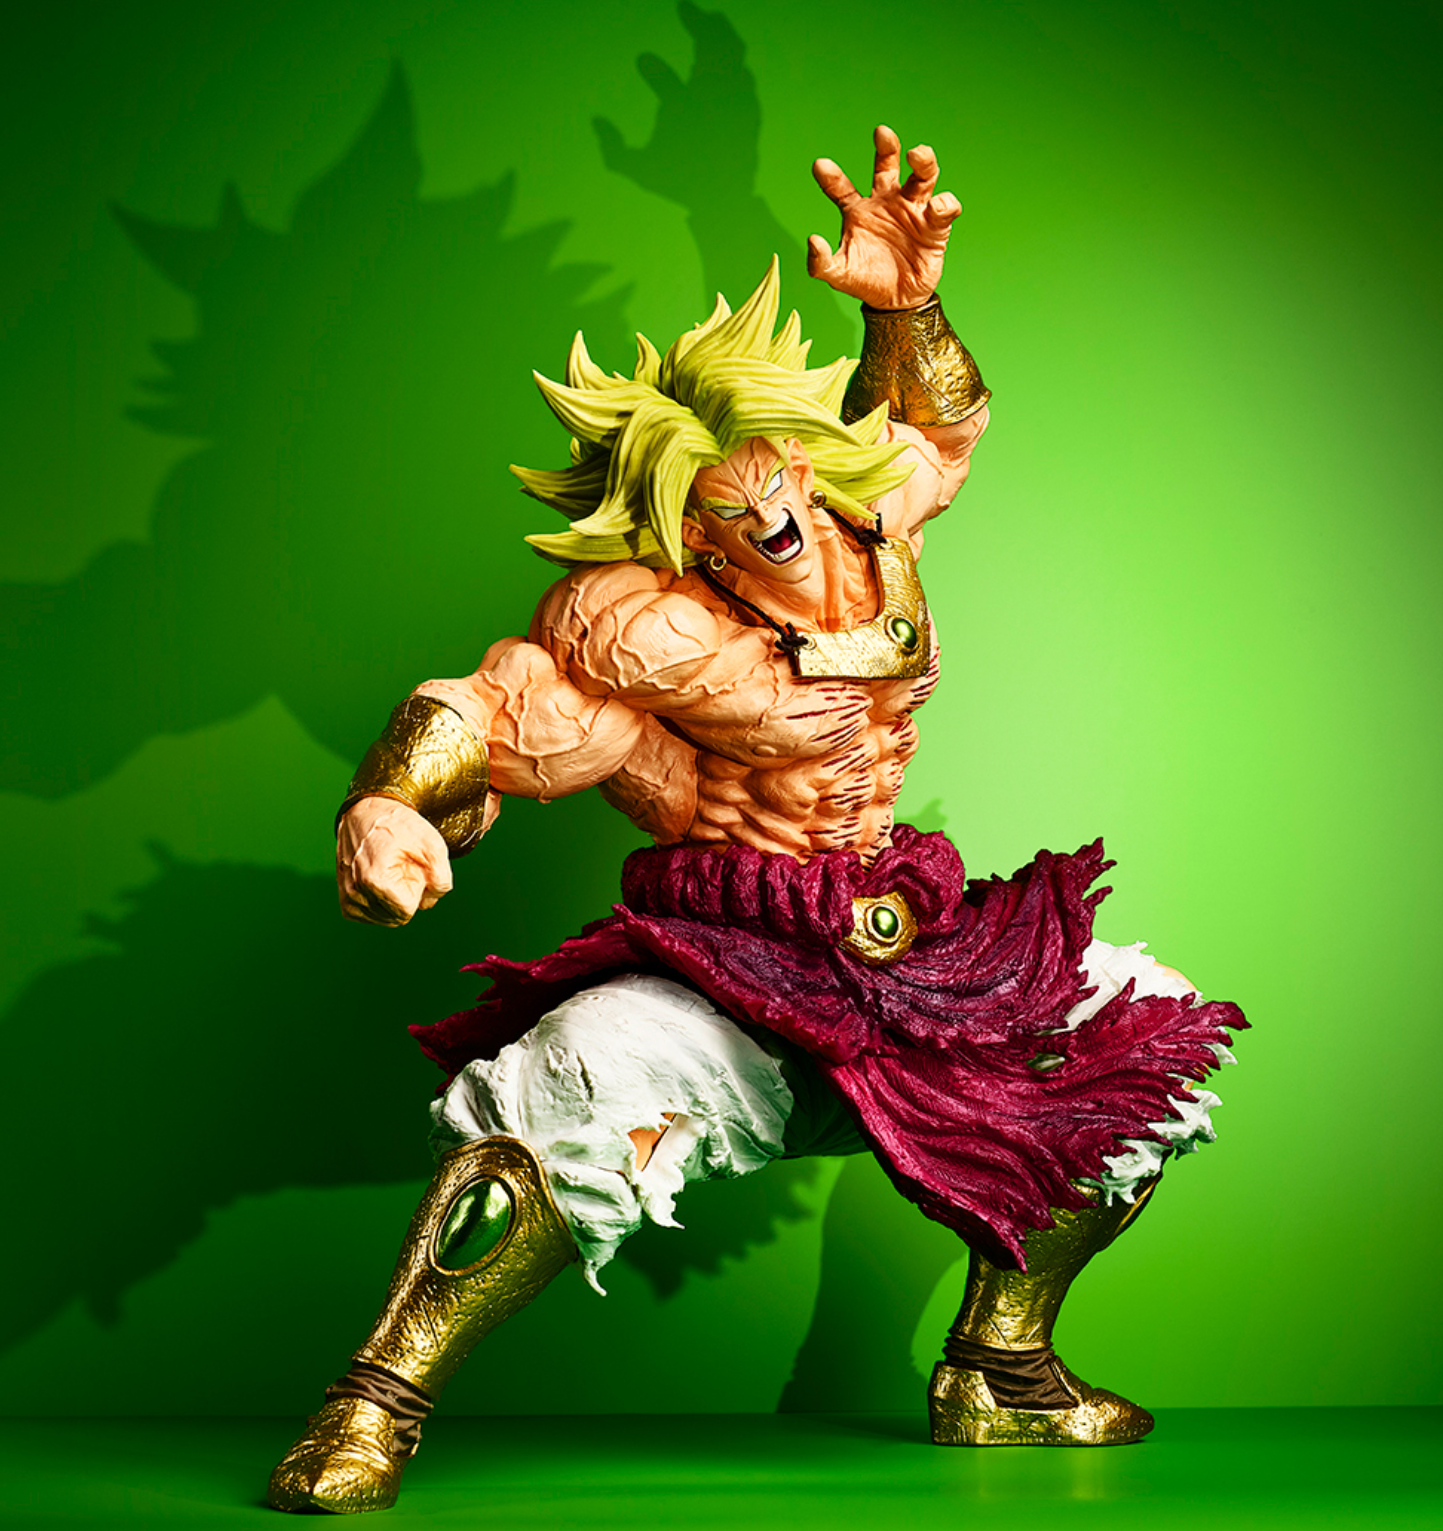 Weekly ☆ Character Showcase #46: Broly from Dragon Ball Super: Broly!]